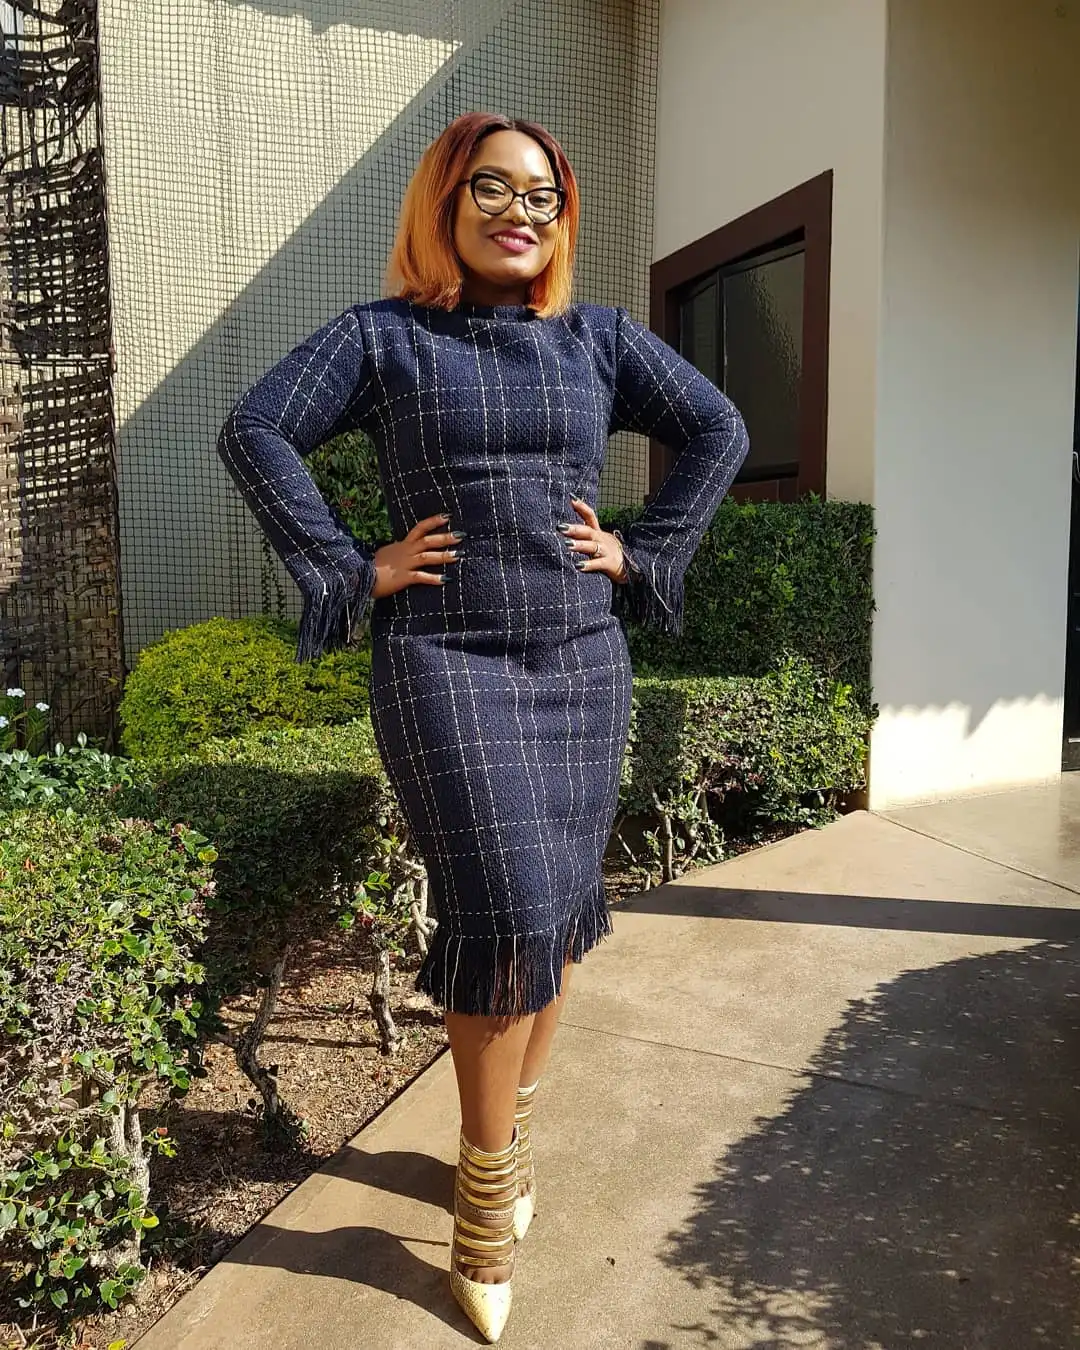 Thobile Khumalo has warned her followers not to fall prey to scammers